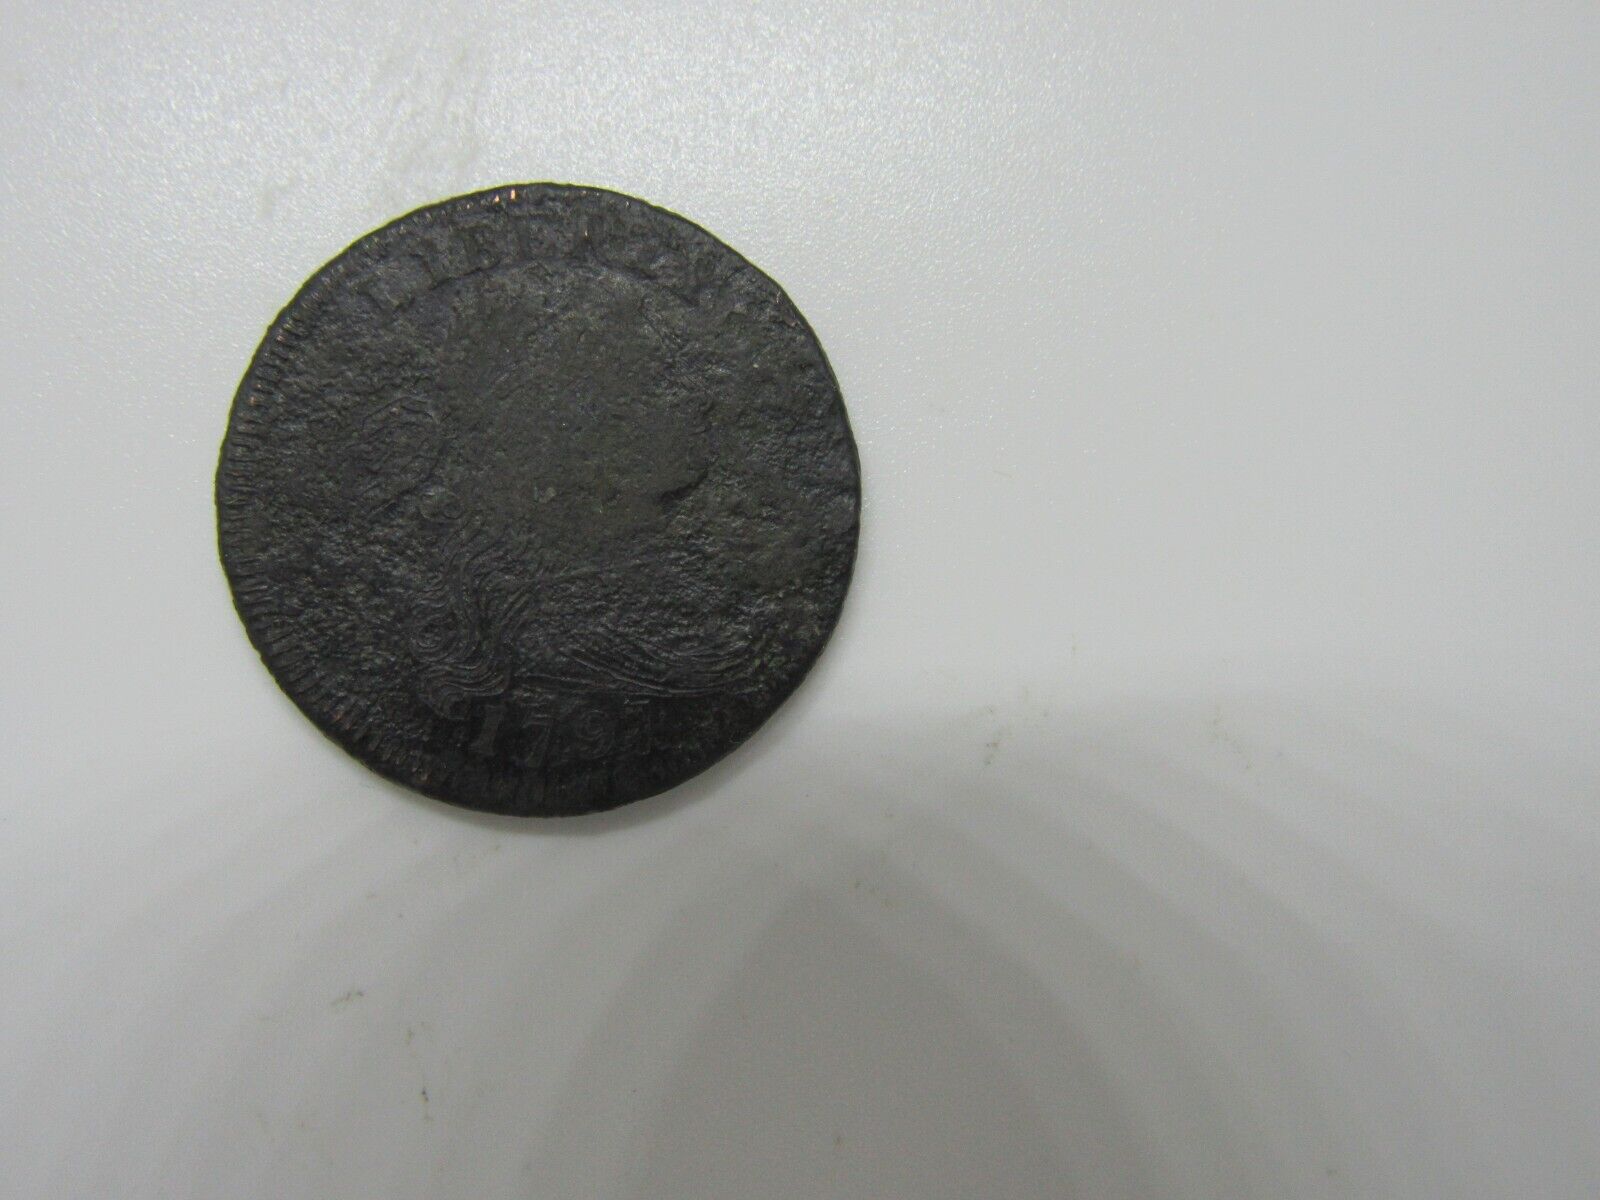 Us 1797 Large Cent, Reverse Of 1795